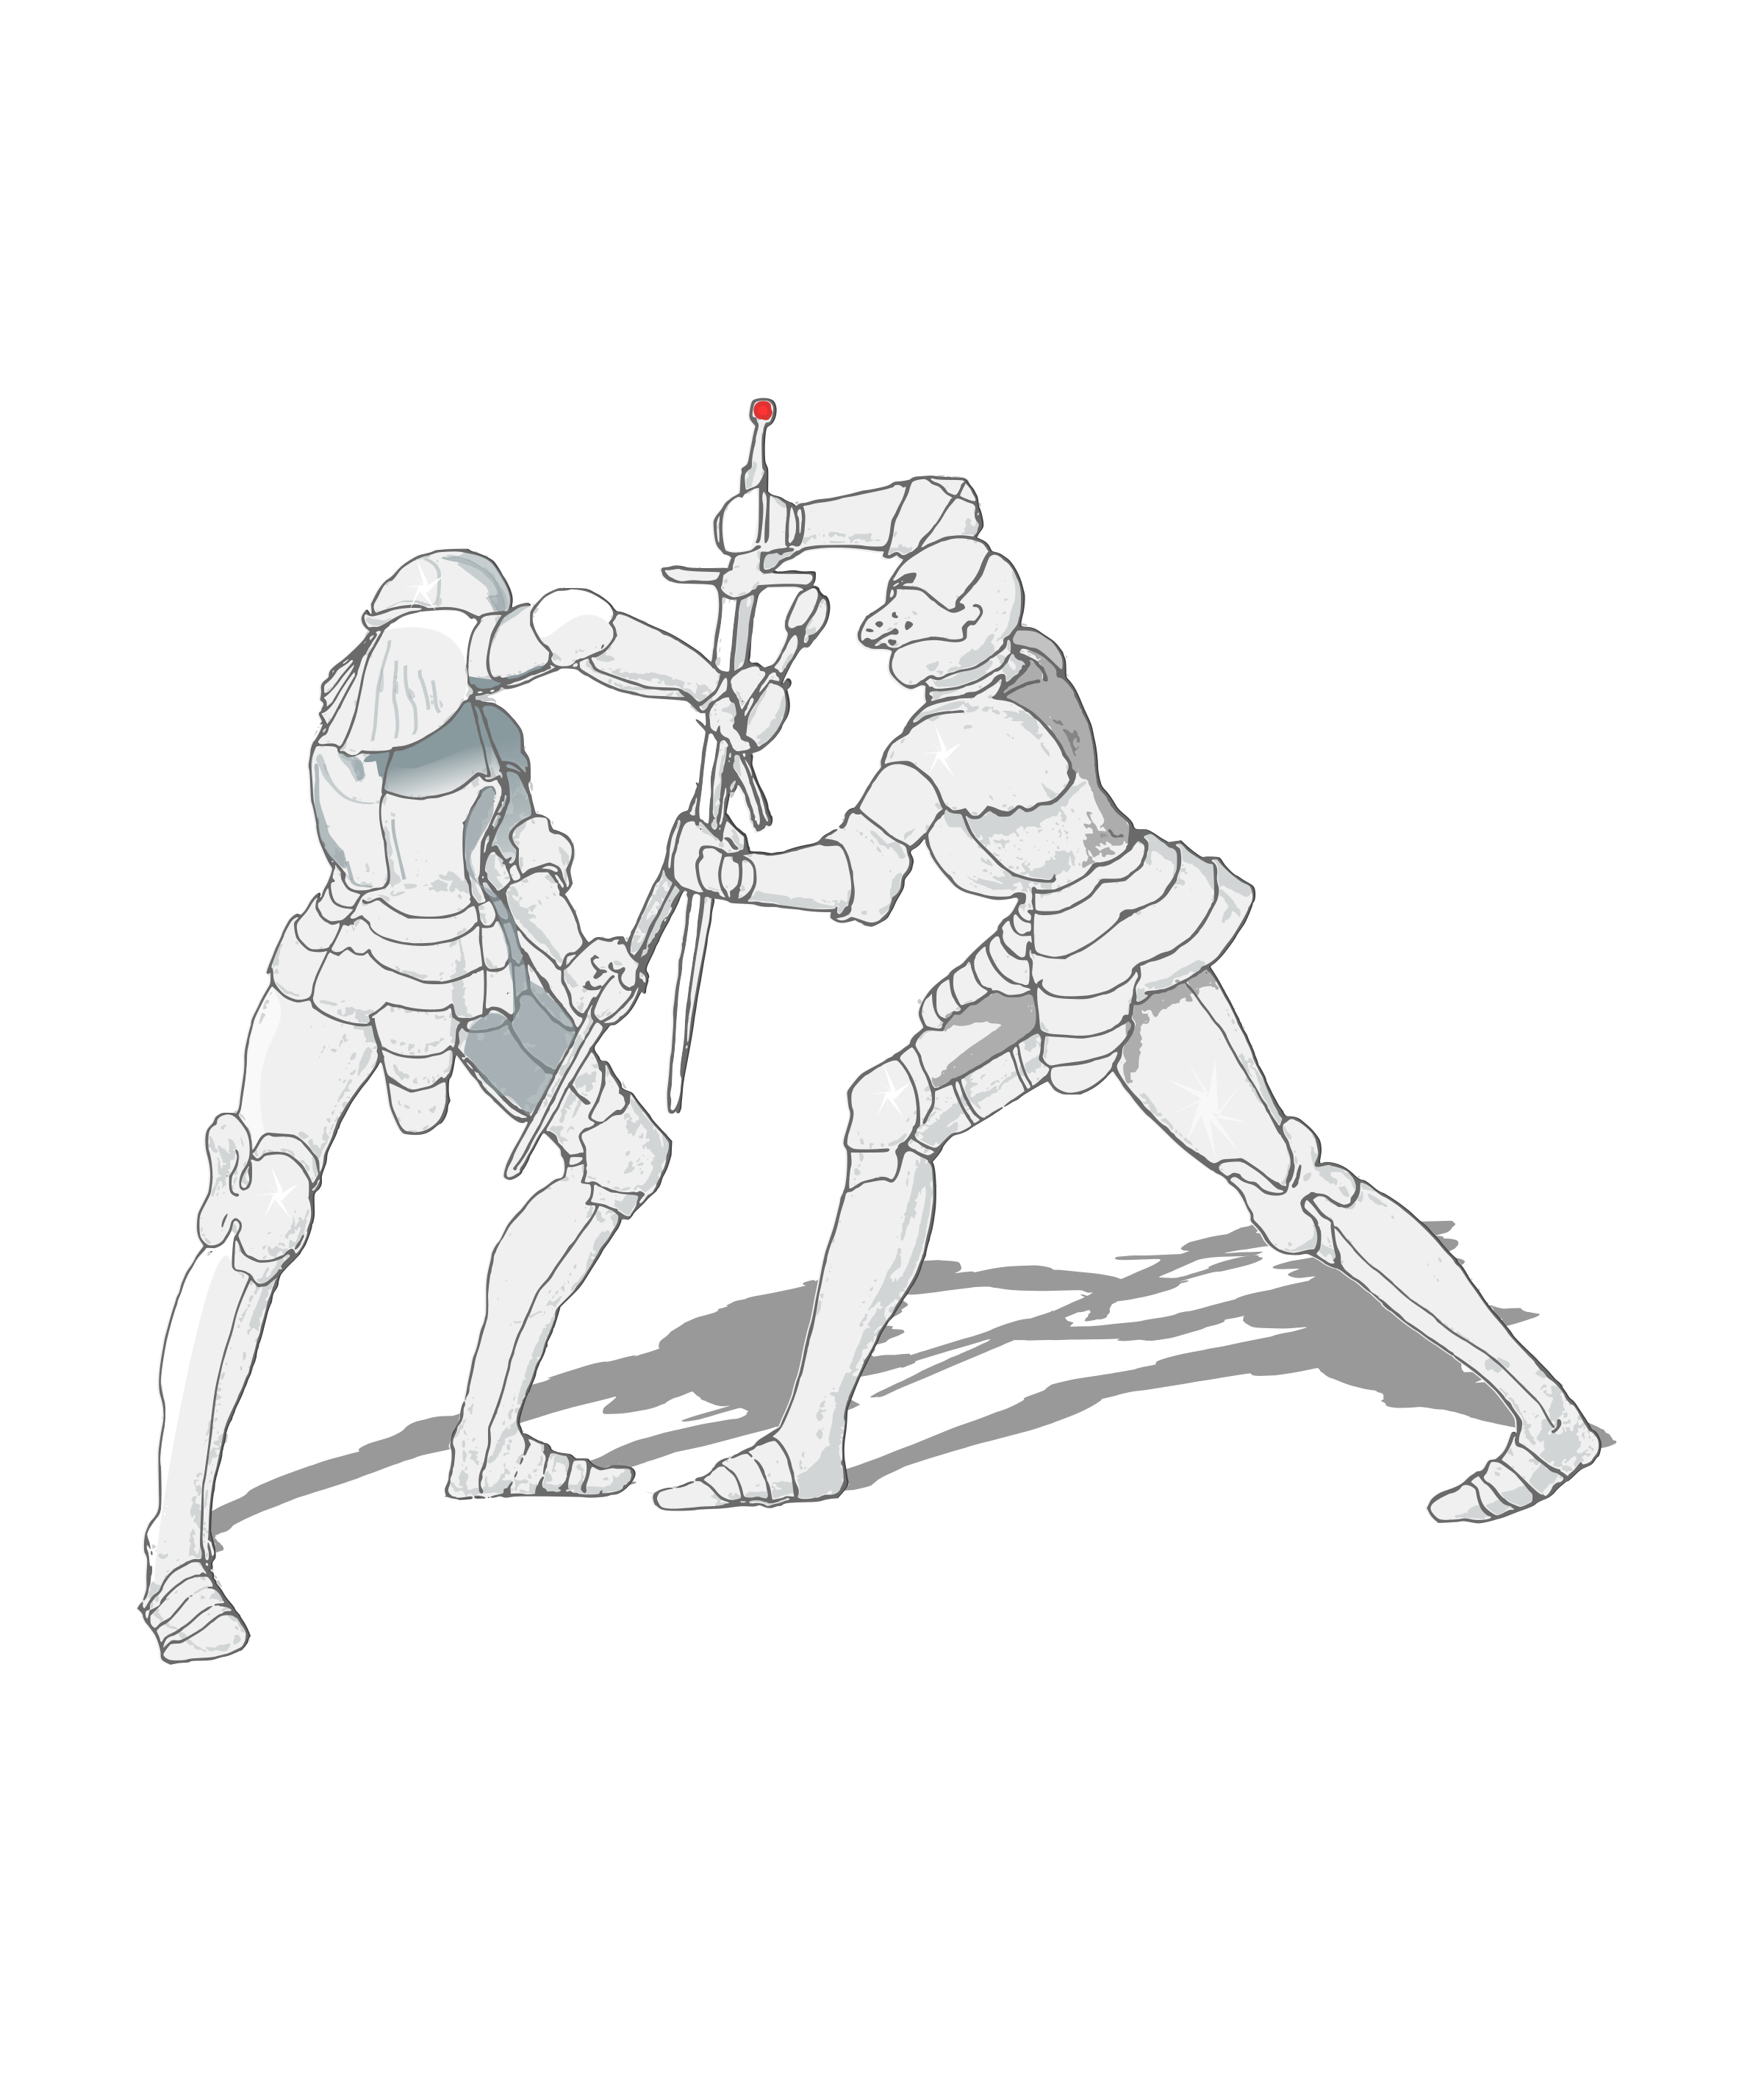 Anime Sword Fight Drawing Sketch Coloring Page